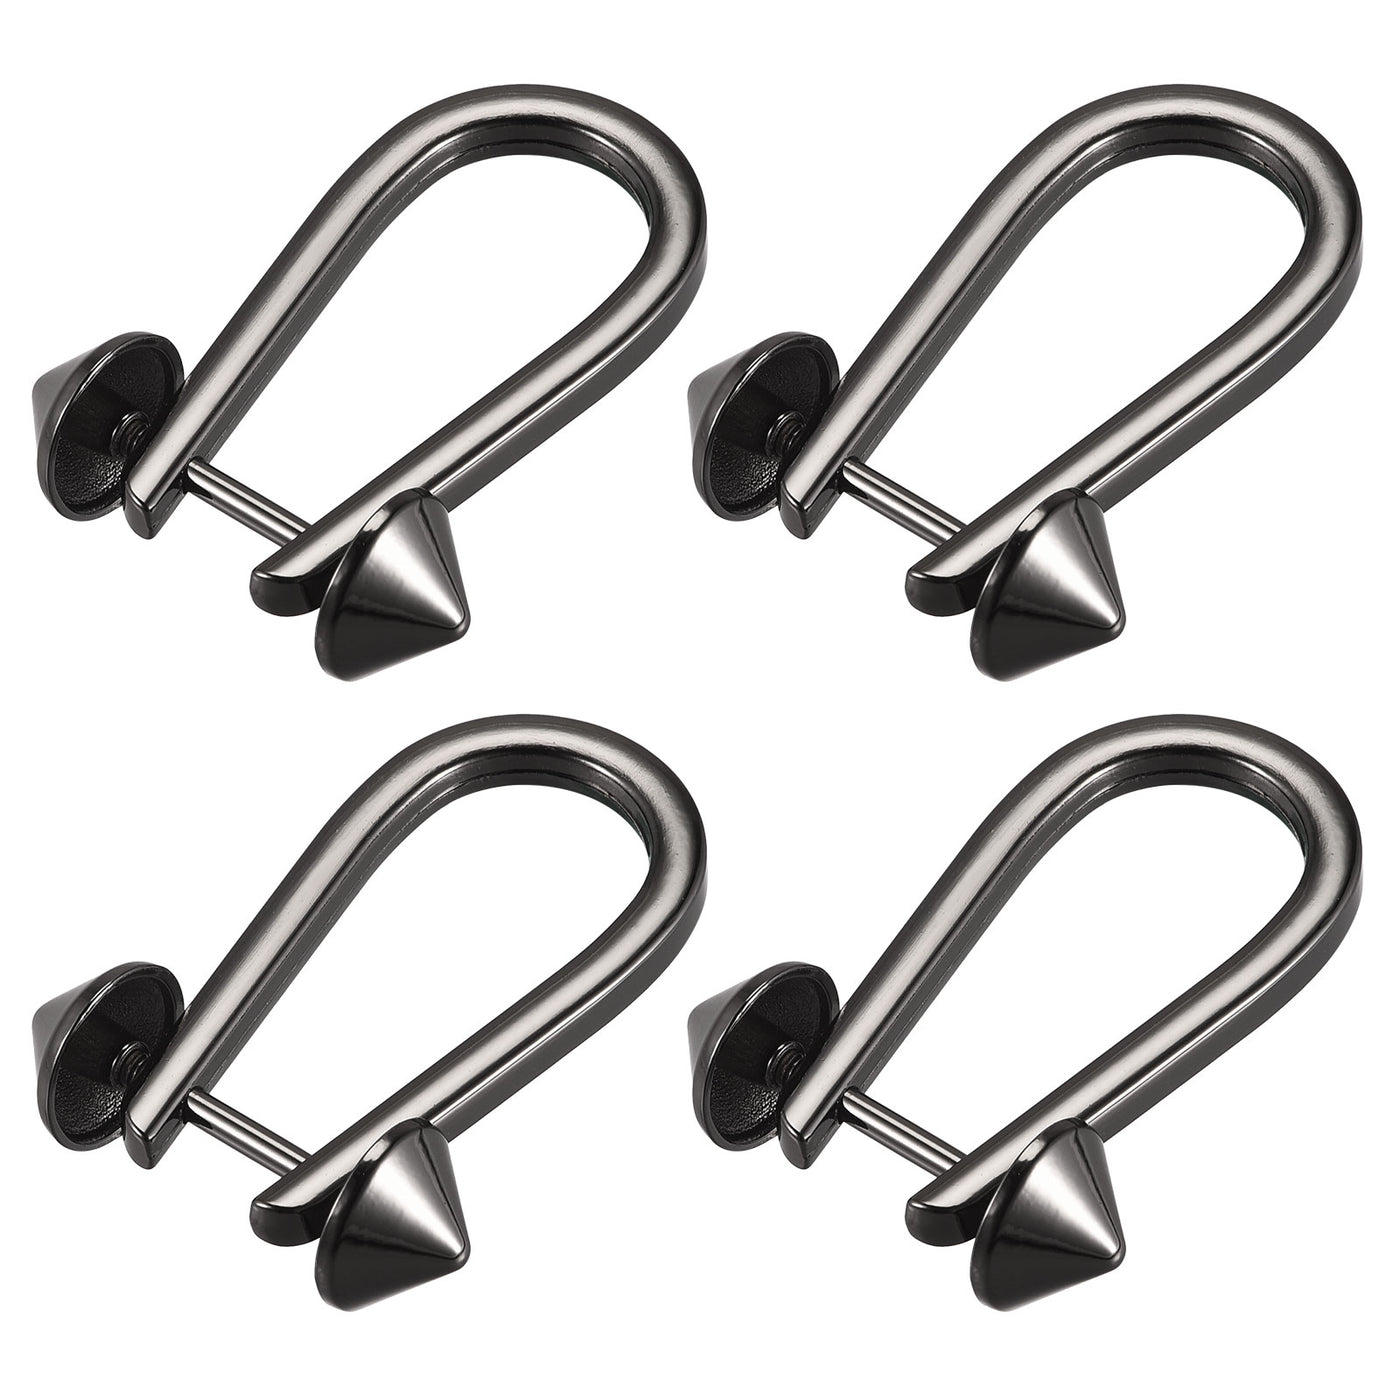 Uxcell Uxcell D-Rings Screw in Shackle, 5Pcs 50mm Horseshoe U Shape D Ring for Bags DIY, Black